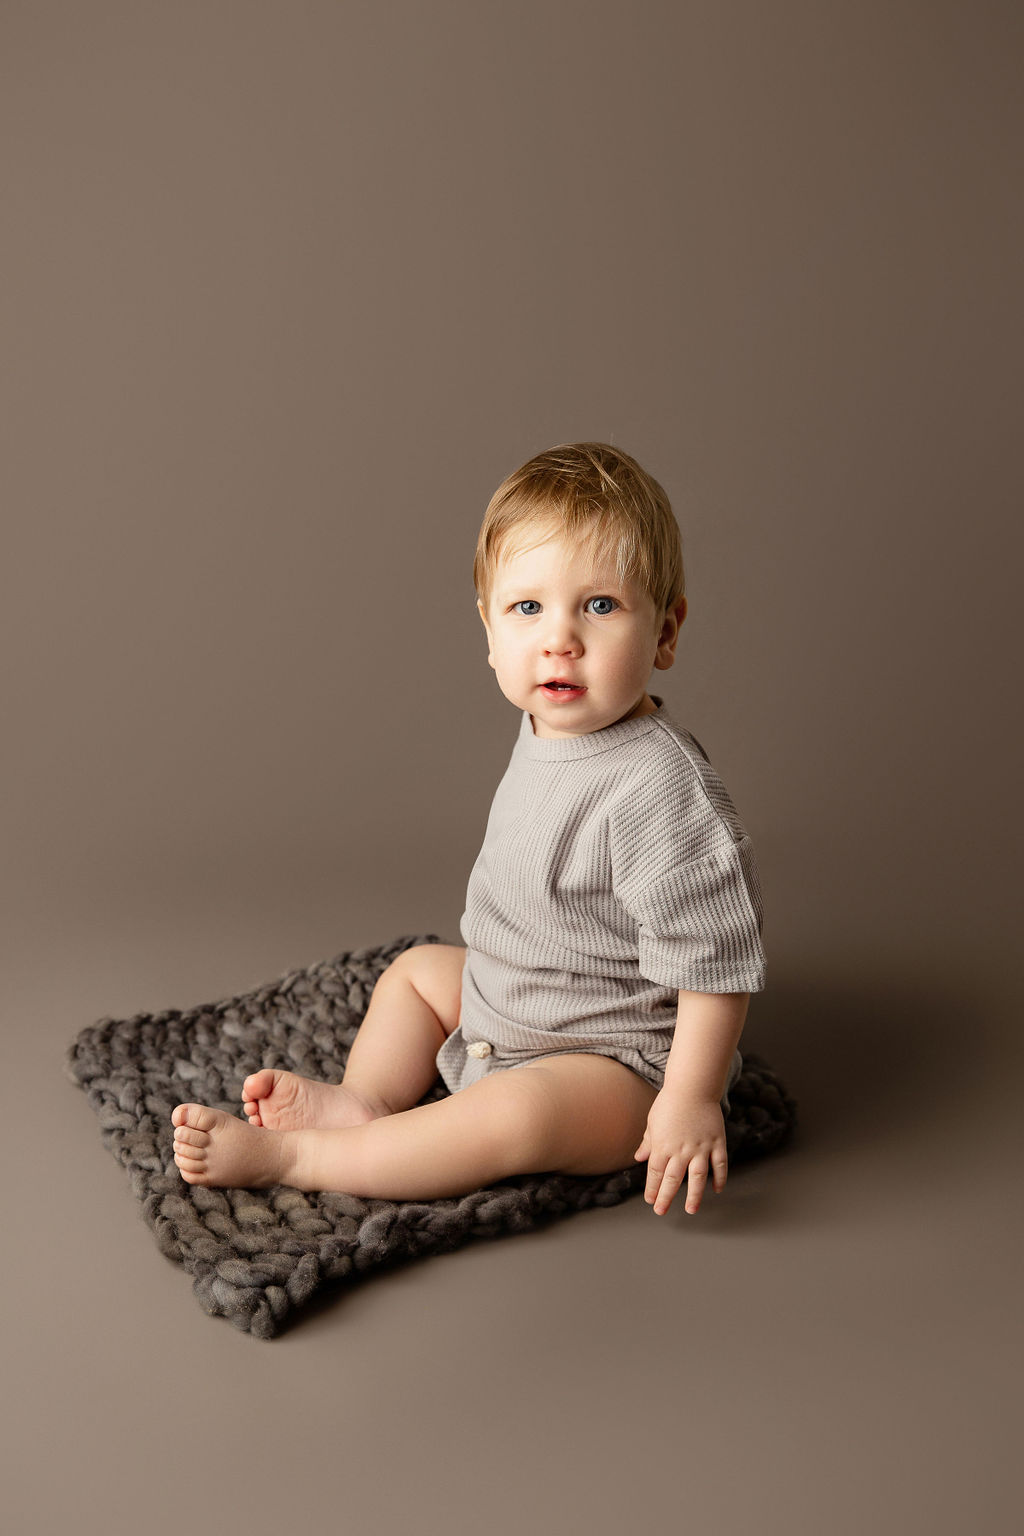 A young blonde toddler boy sits on a small mat in a studio in a grey onesie